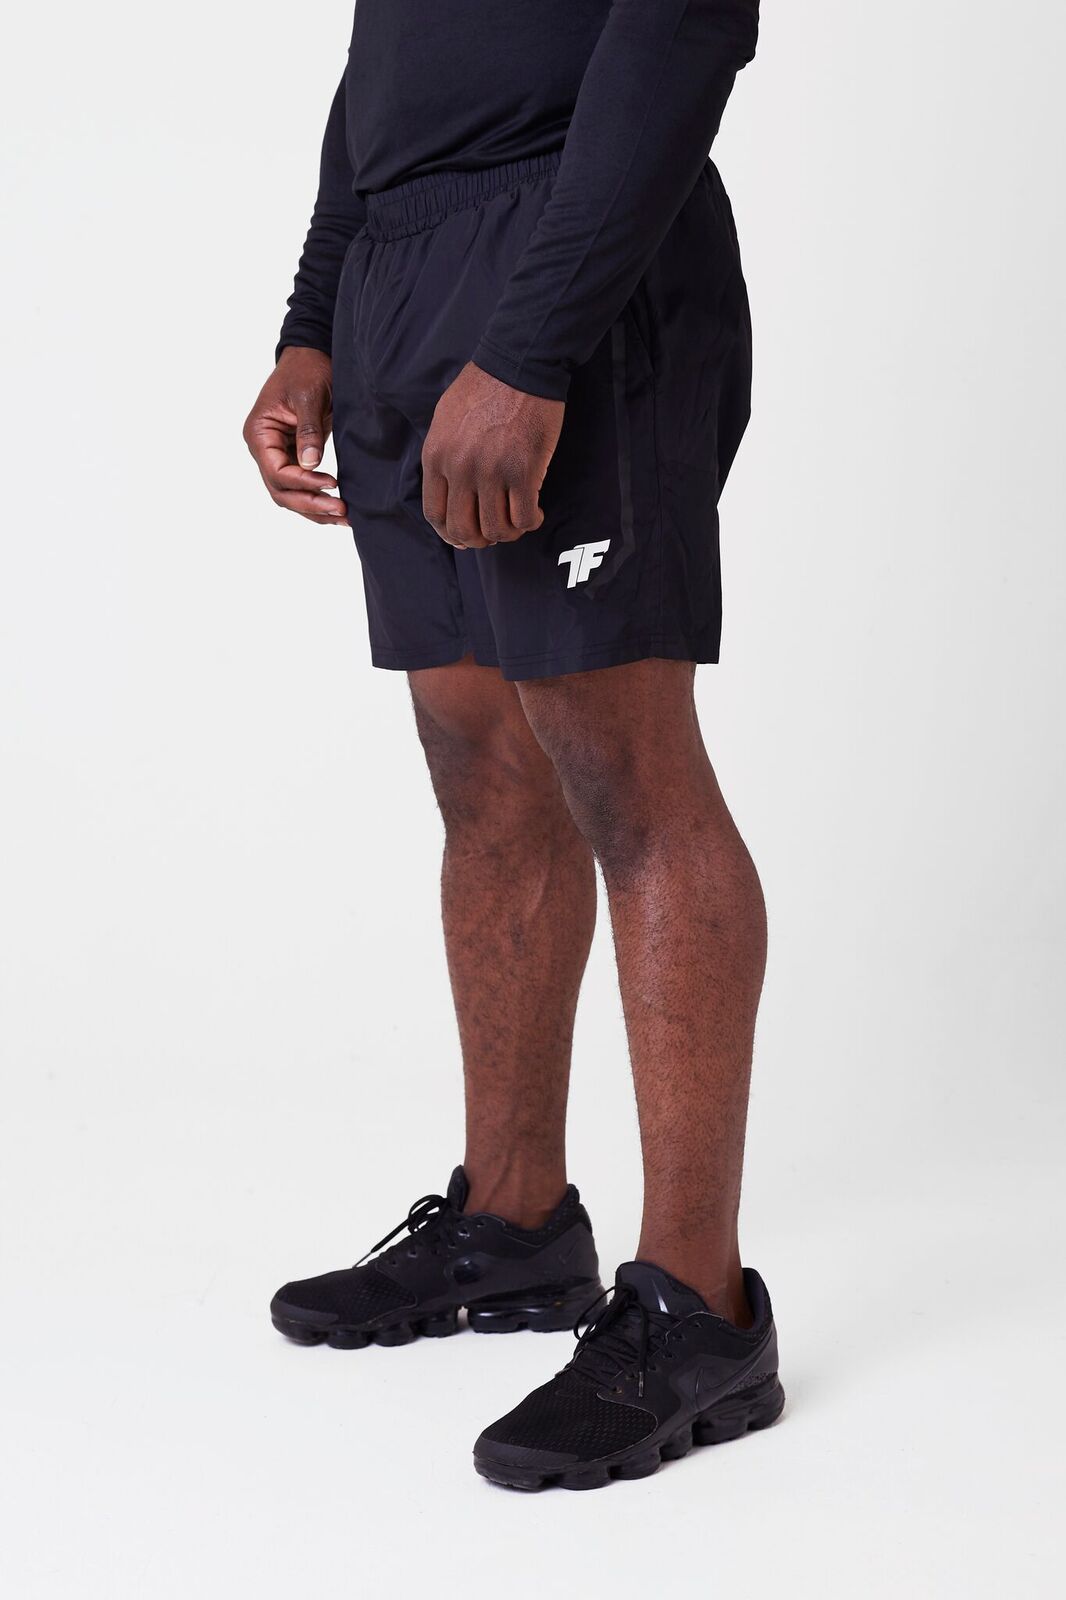 A man wearing black shoes and black true form shorts of the brand trueform uk 